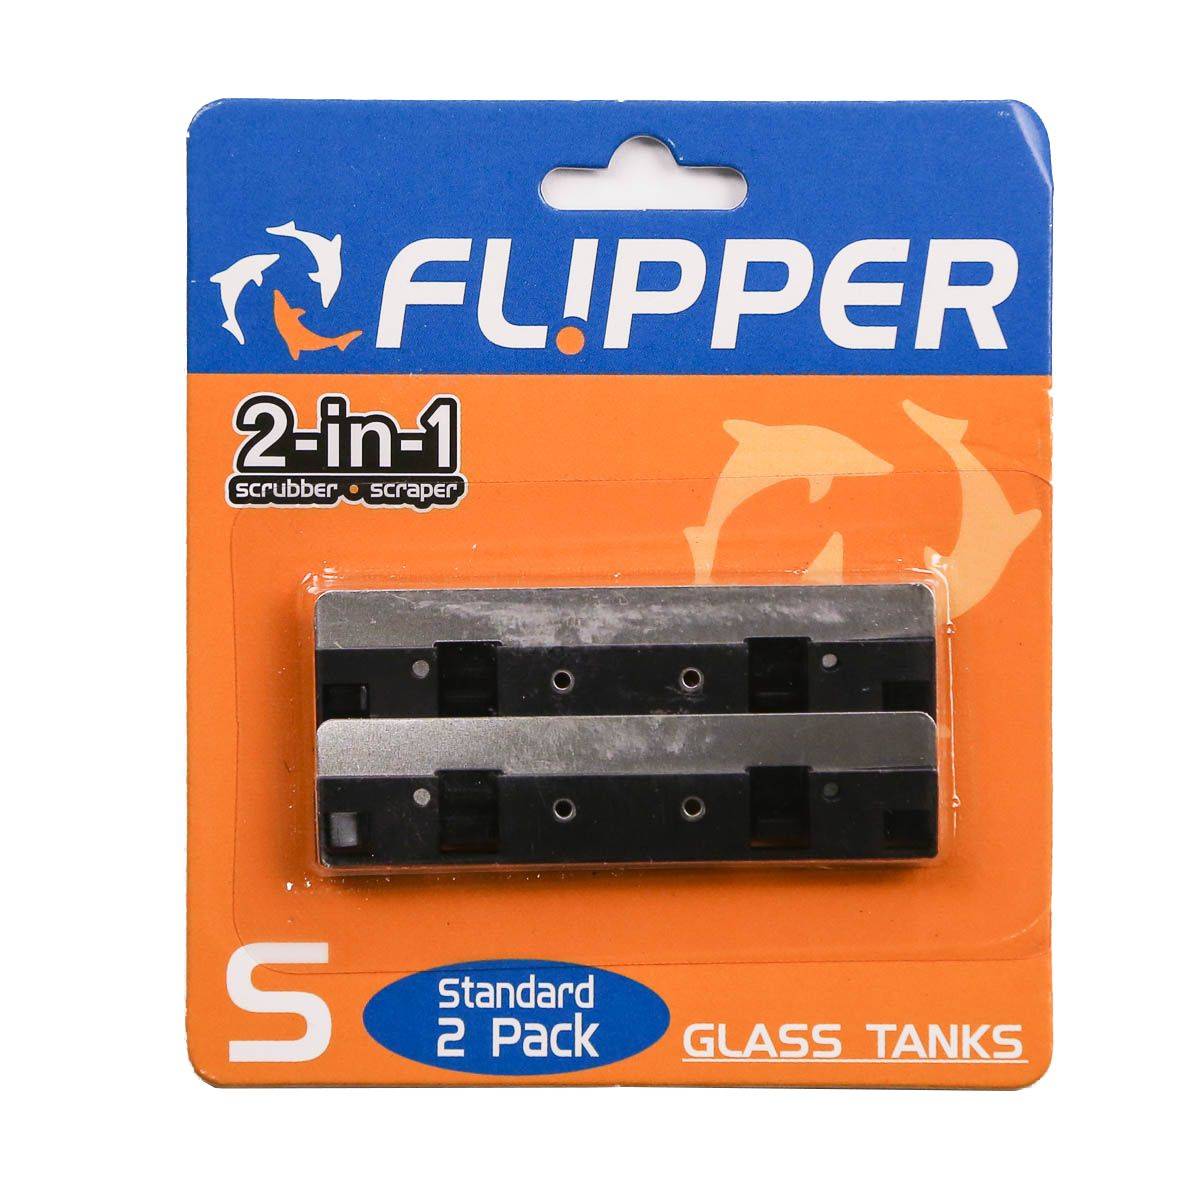 Flipper Float Cleaning Magnets